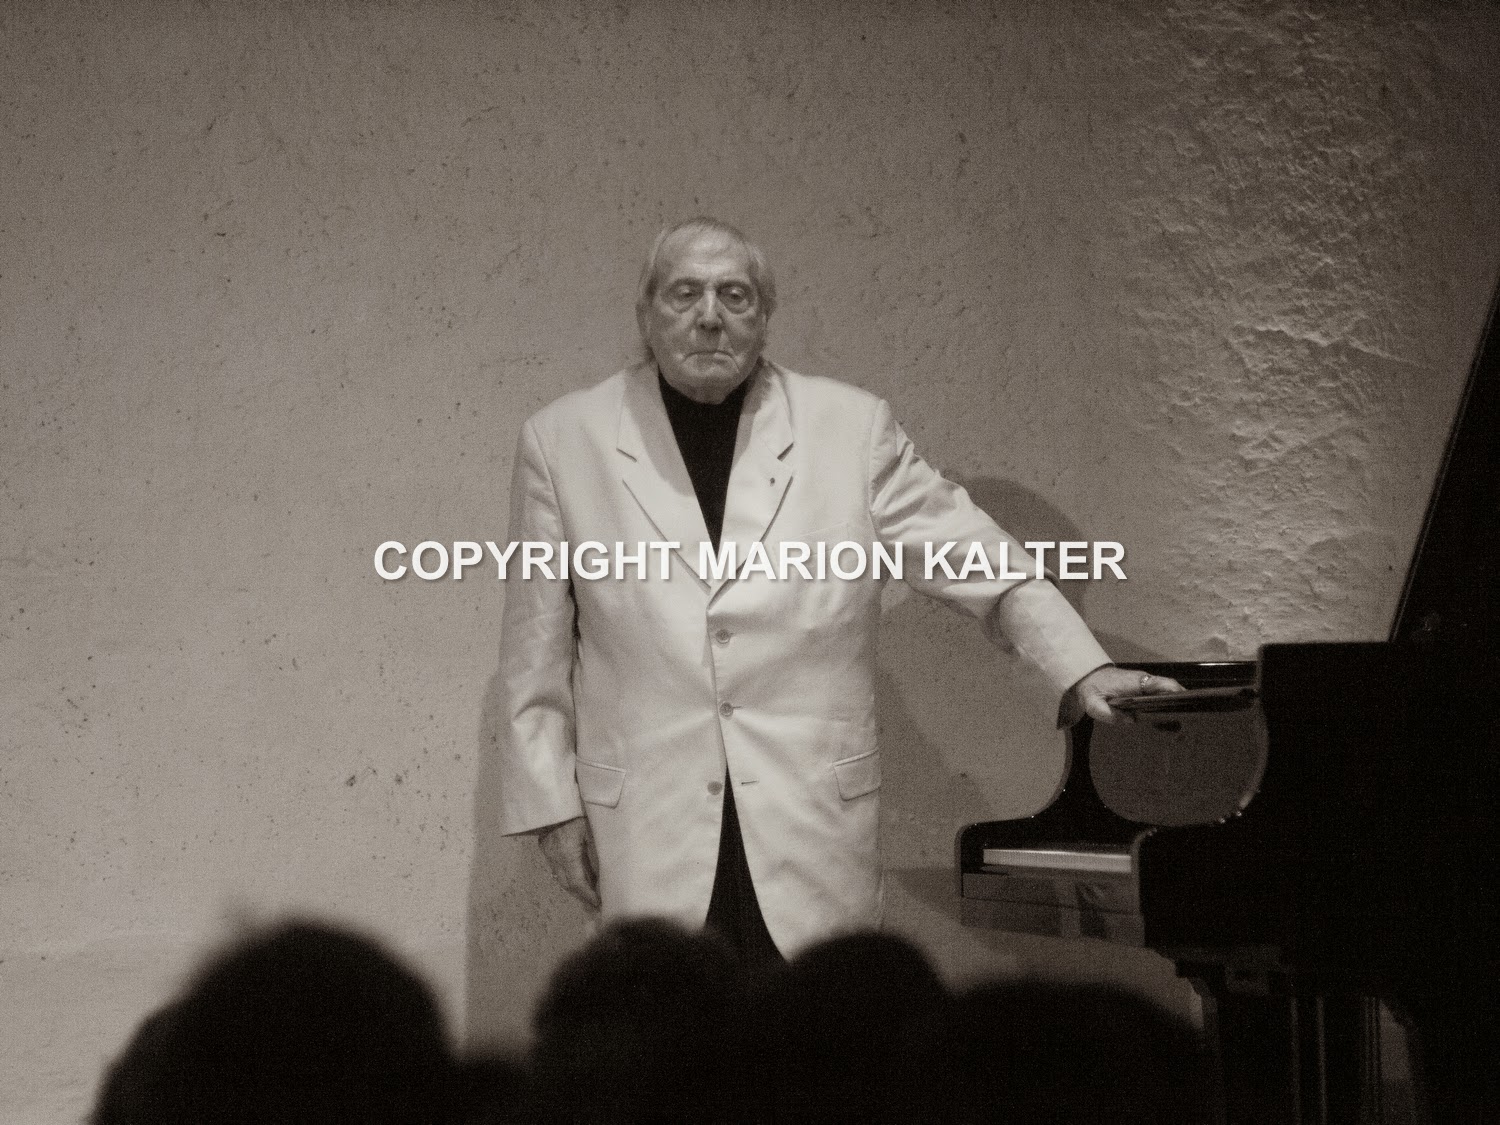 Fearless Materialisme satellit marion kalter: Homage to pianist Aldo Ciccolini 1925-2015